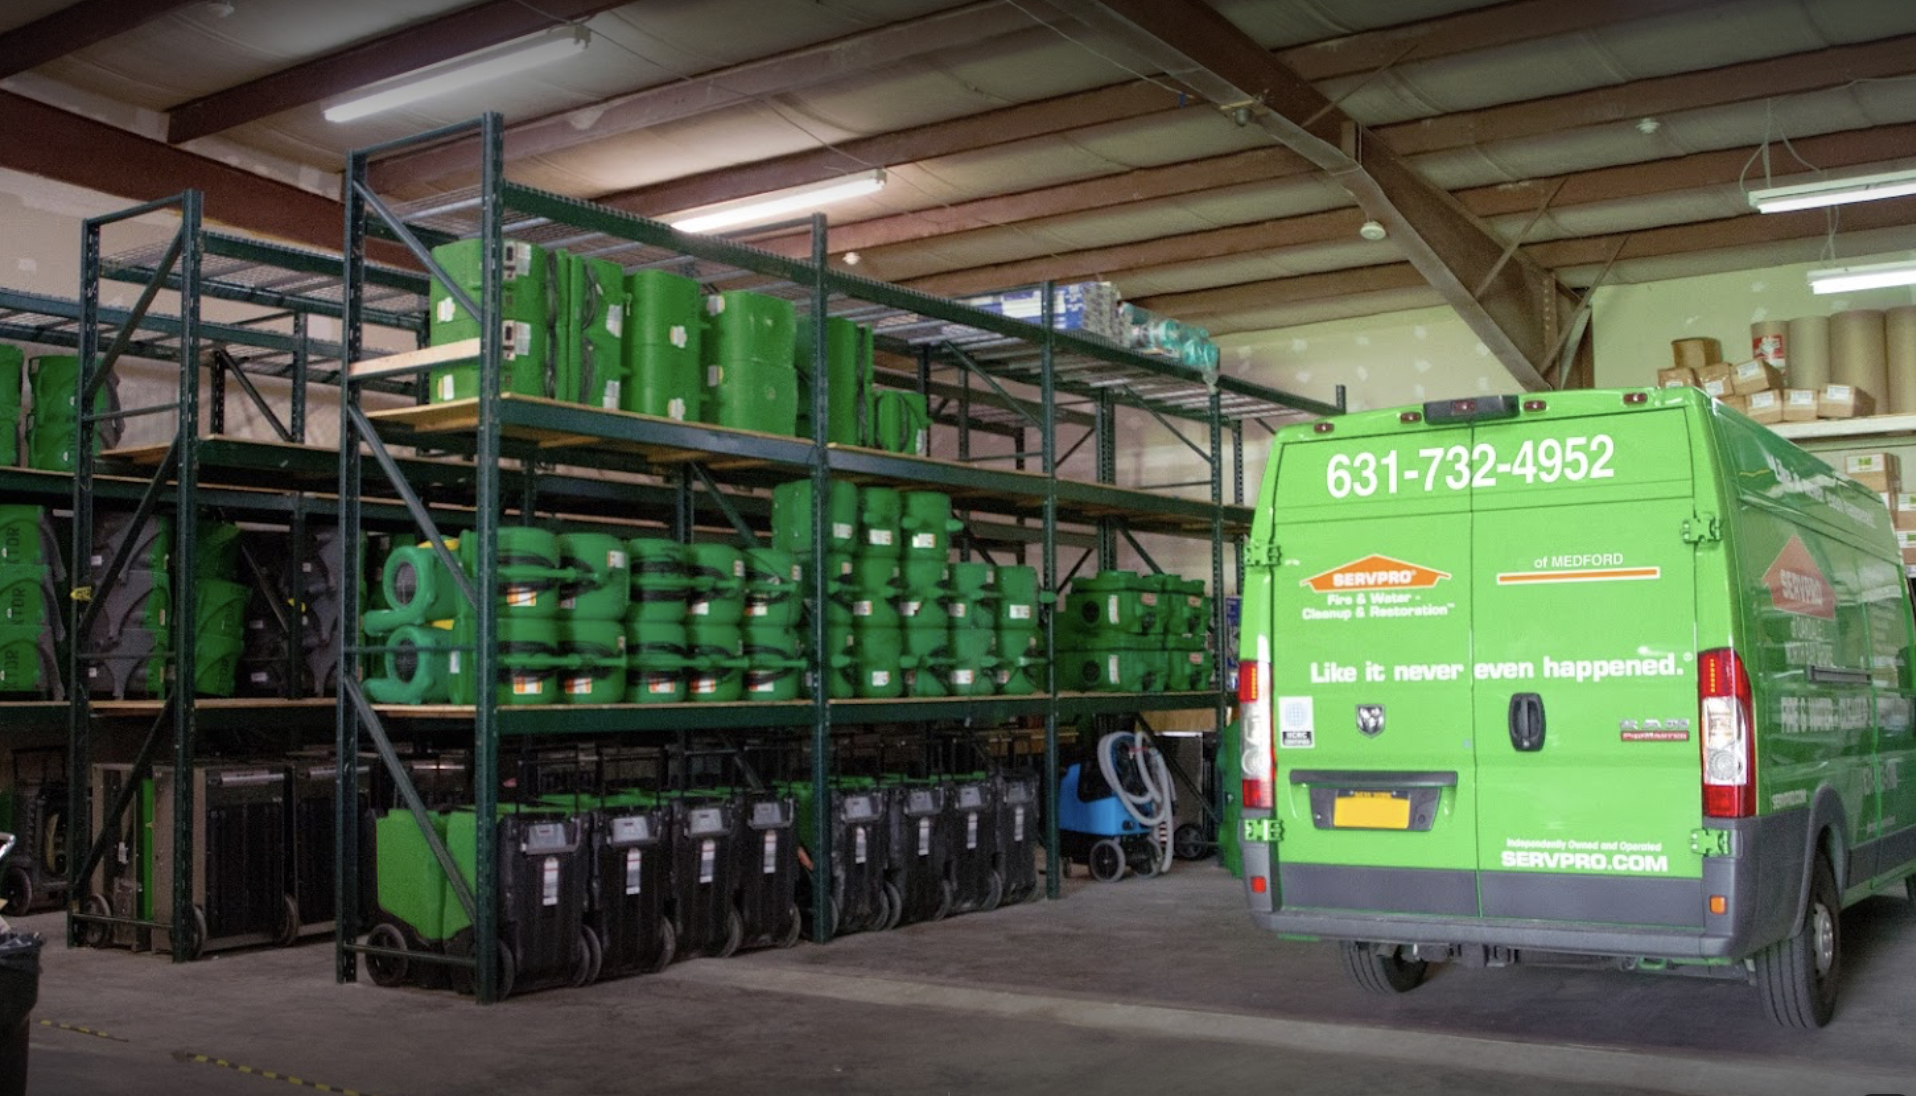 SERVPRO of Medford warehouse ready to serve local residents with property damage restoration